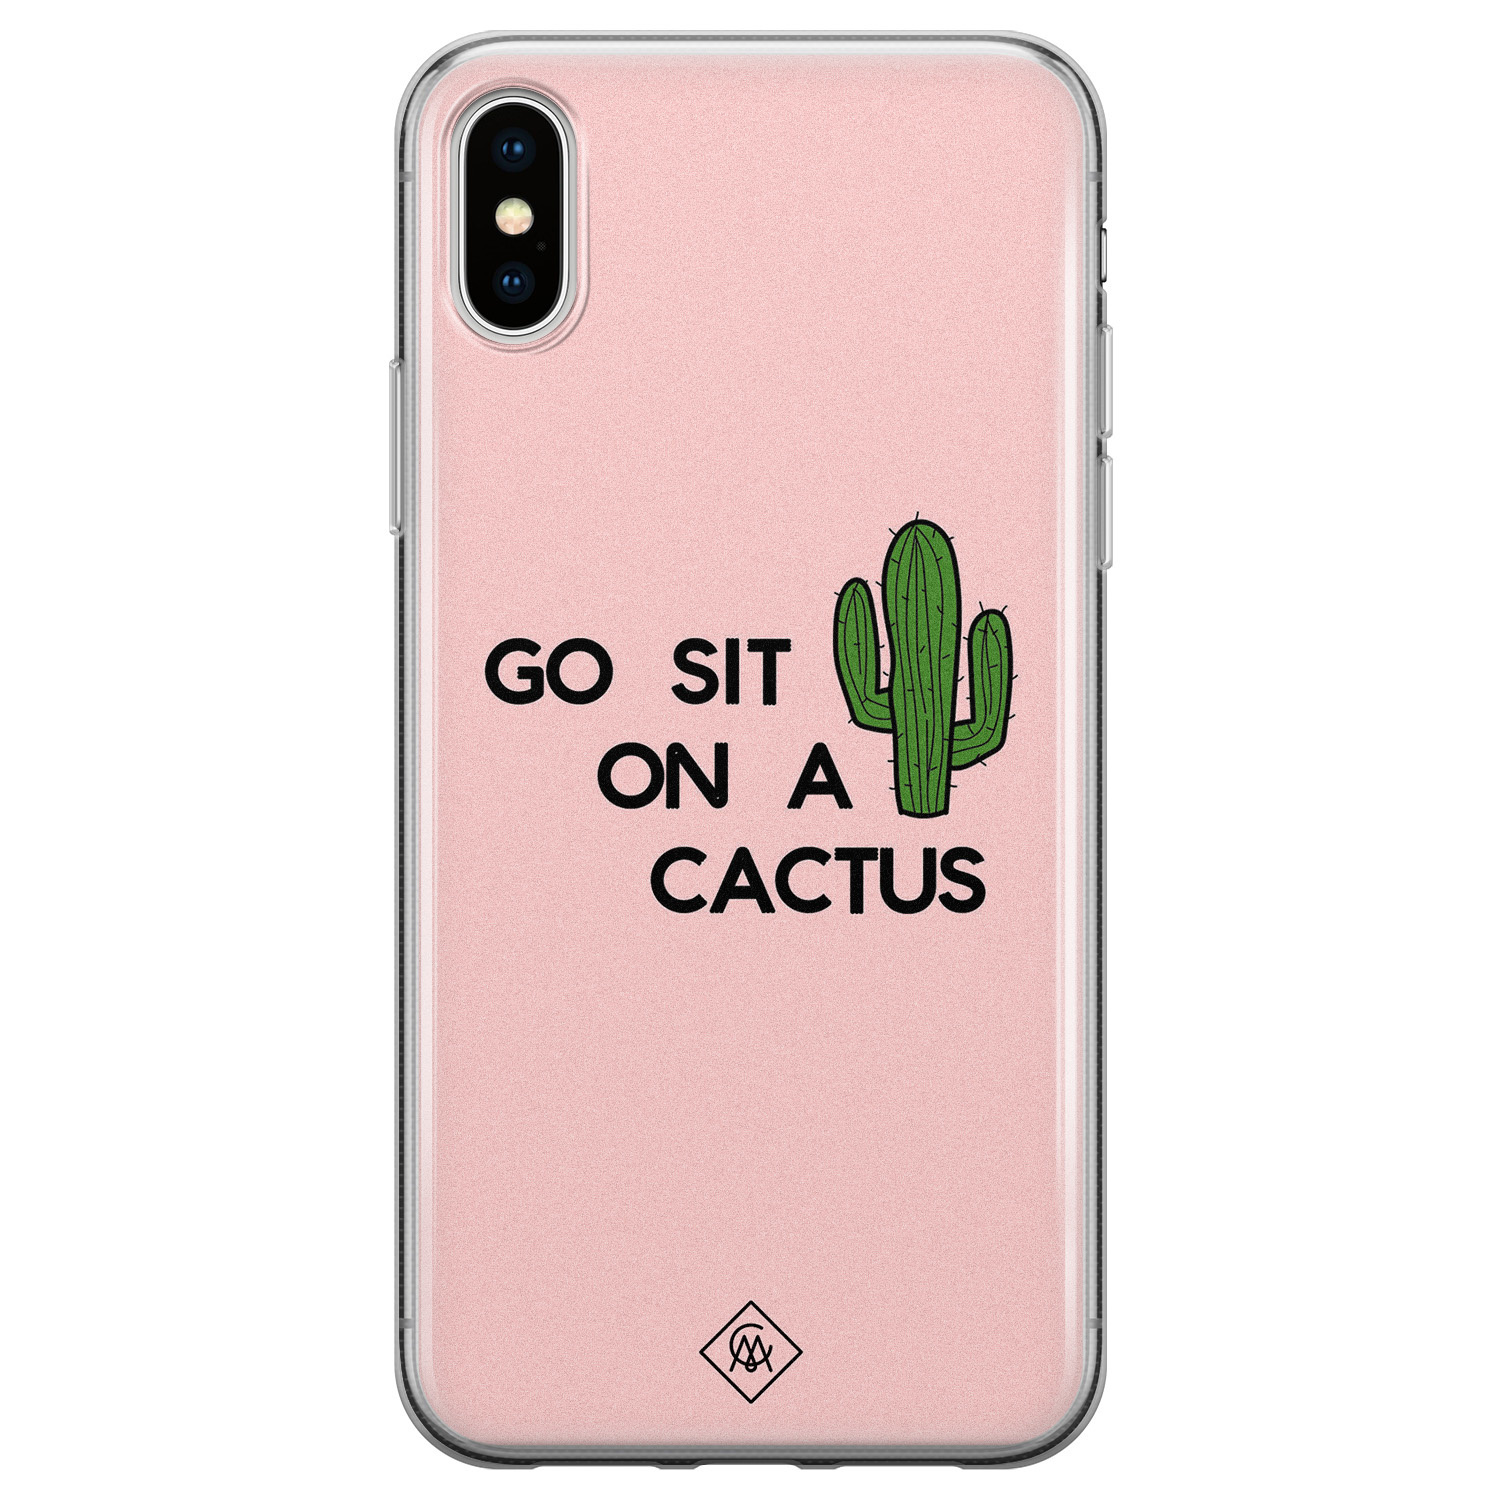 iPhone XS Max siliconen hoesje - Go sit on a cactus